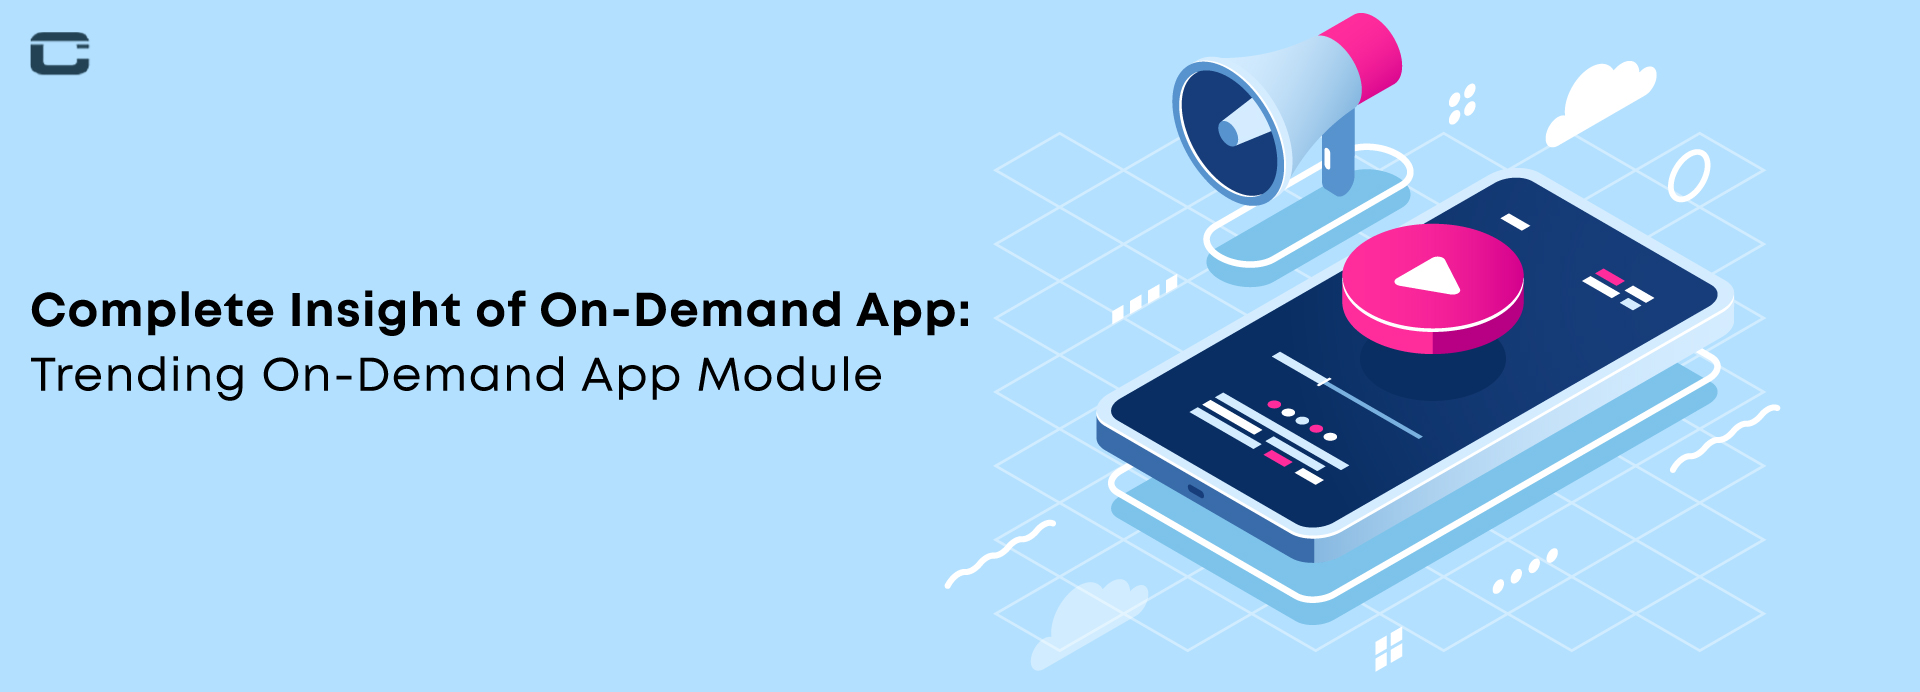 Complete Insight of On-Demand App and Trending On-Demand App Module